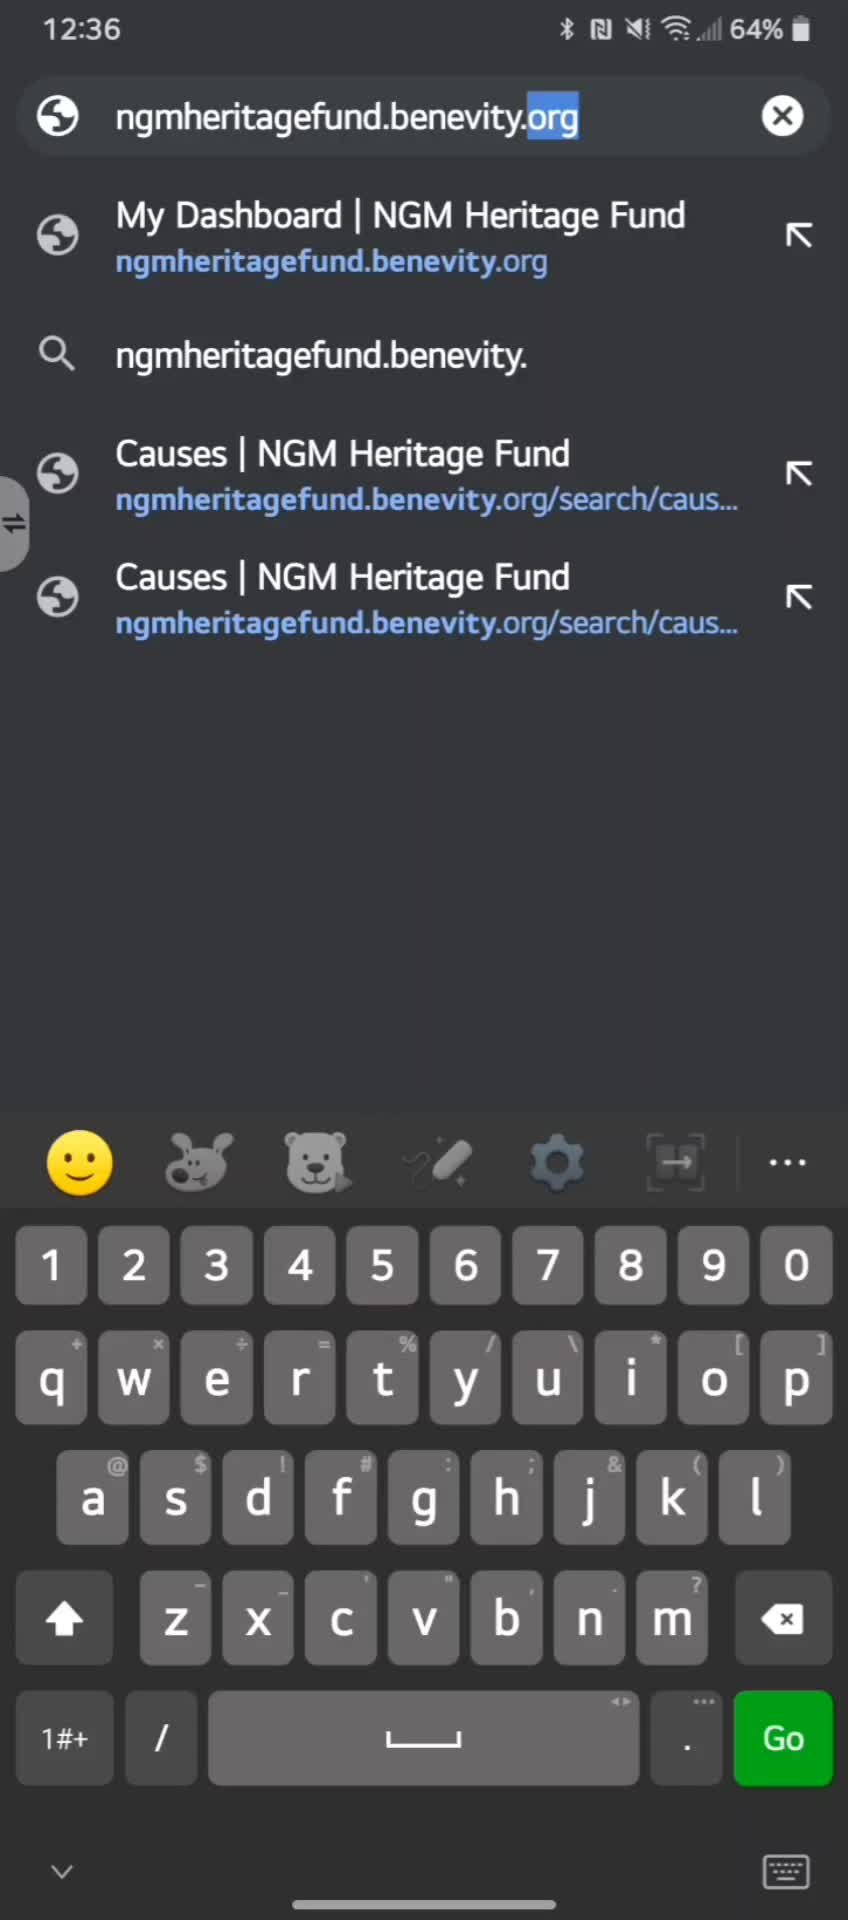 How to donate through the Heritage Fund thumbnail